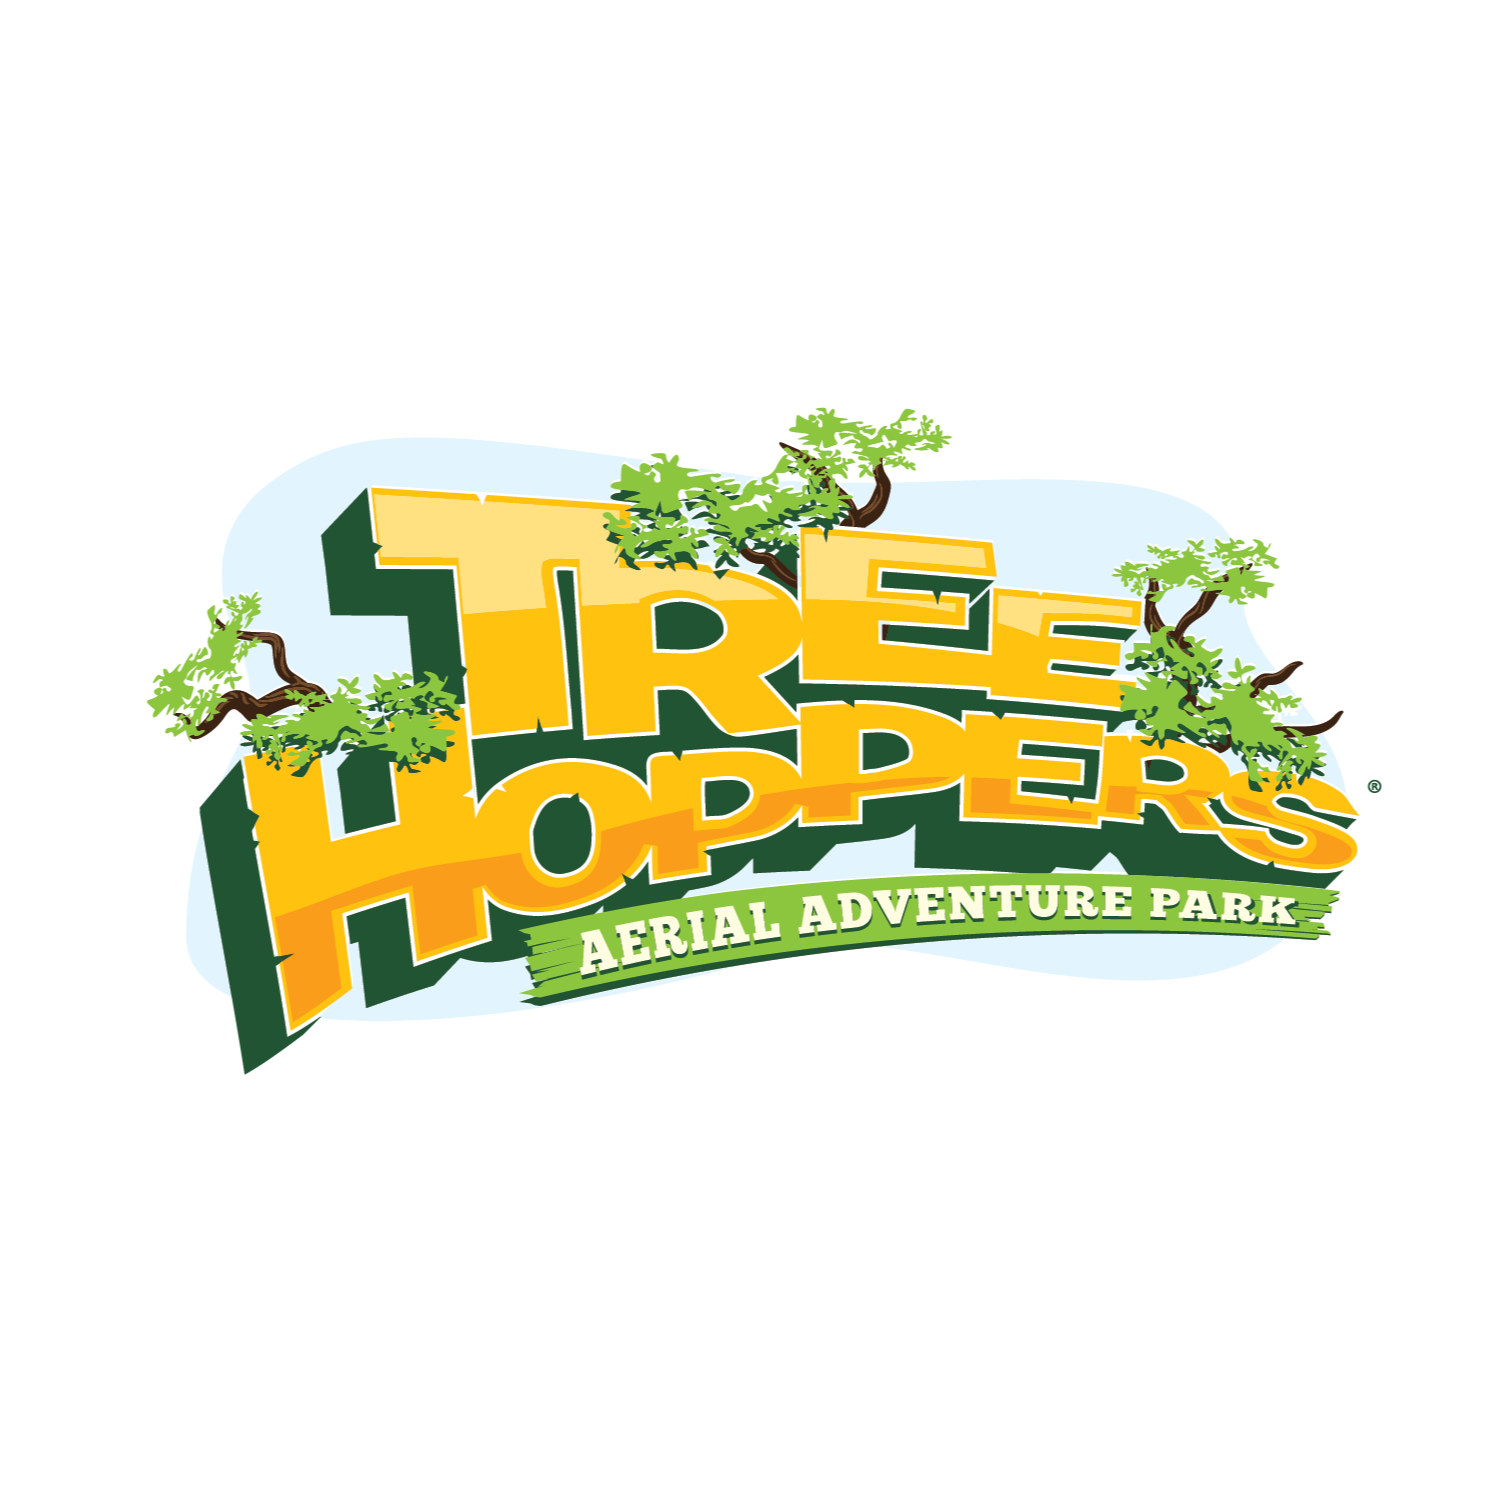 TreeHoppers Aerial Adventure Park TreeHoppers Aerial Adventure Park Dade City (813)381-5400